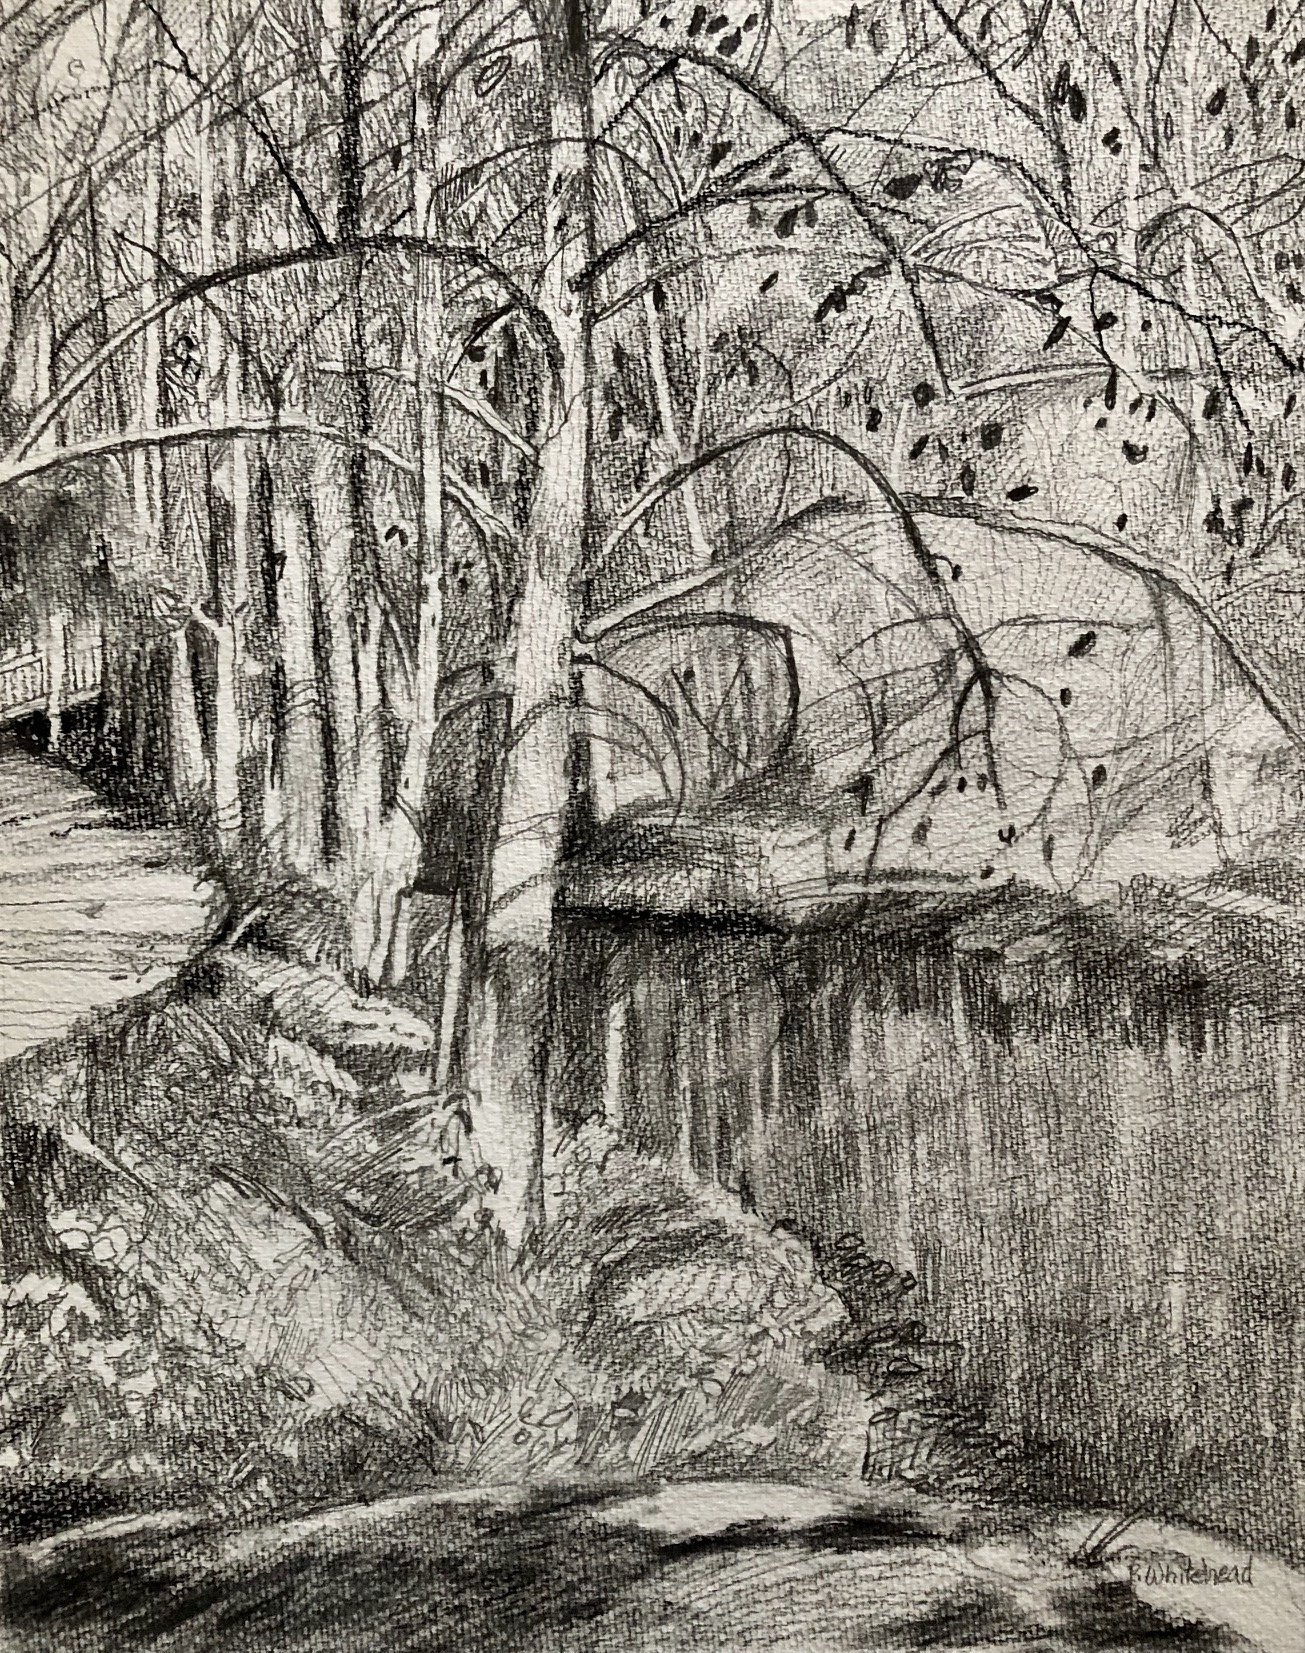 Towpath on the C&O - Allee, 11 x 14", graphite, charcoal, conte